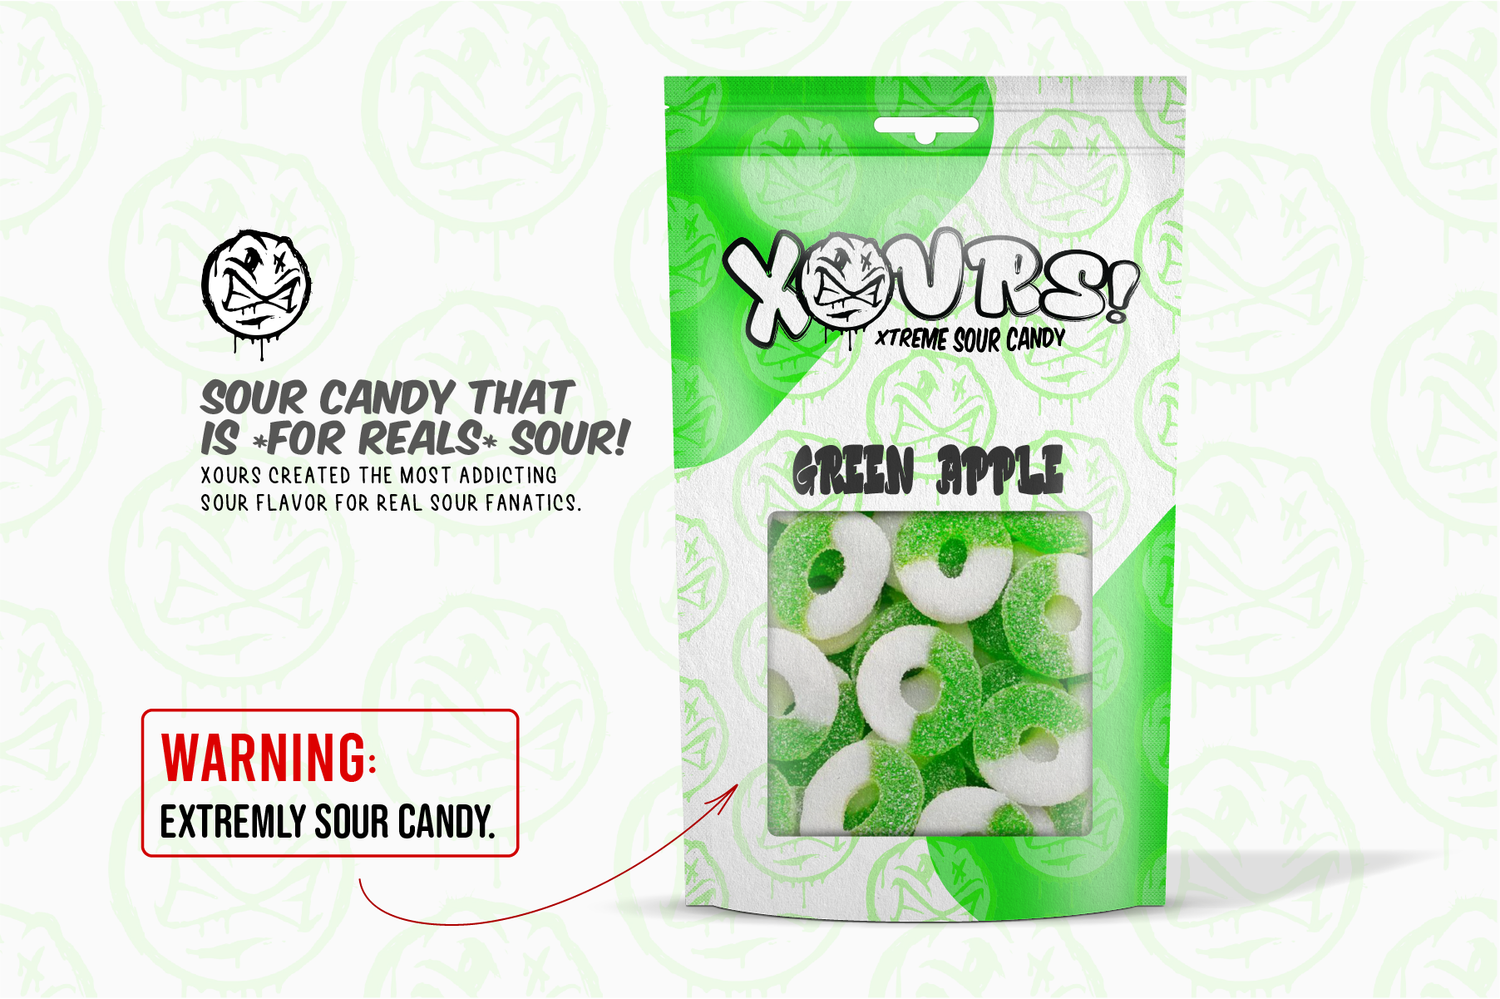 Xtreme Sour Candy - Coming Soon!